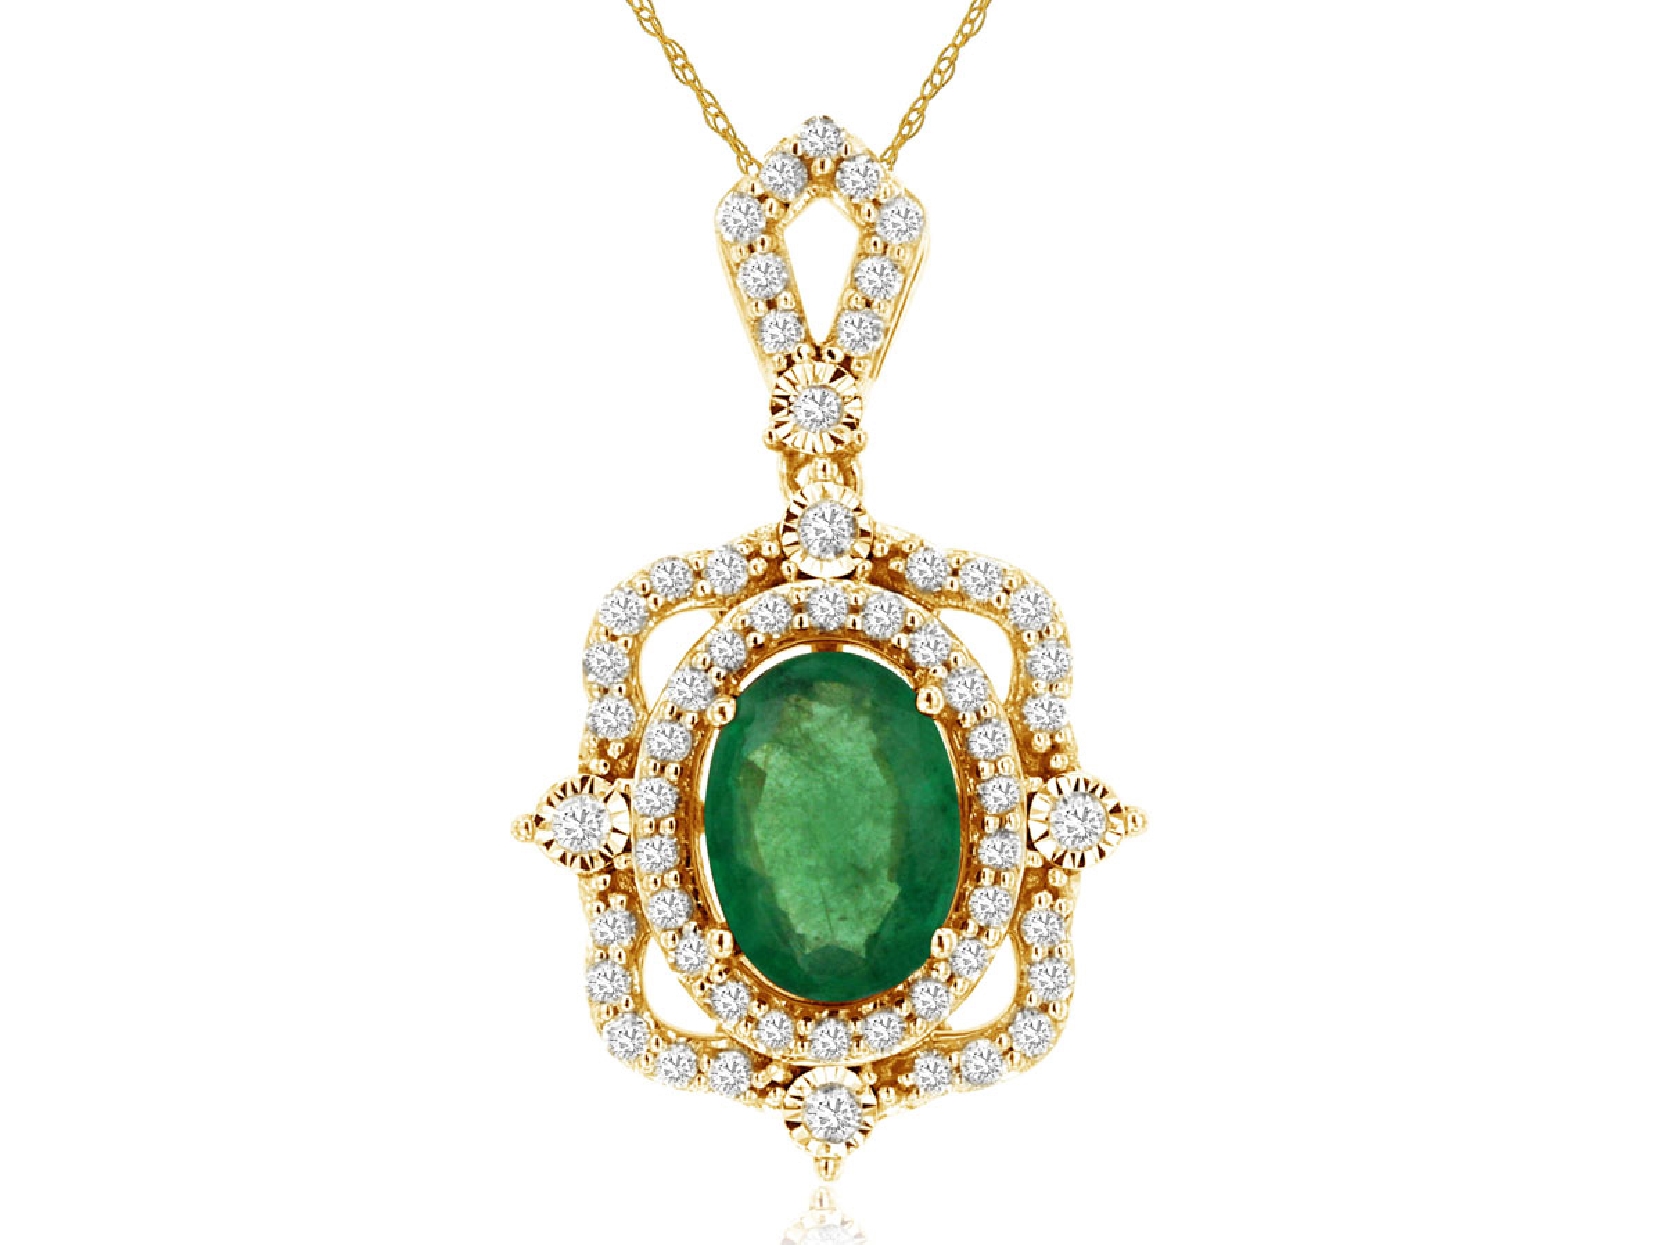 14K Yellow Gold Emerald Necklace with Intricate Diamond Halo

.70ct Emerald 
.25ct Diamond
17 Inches